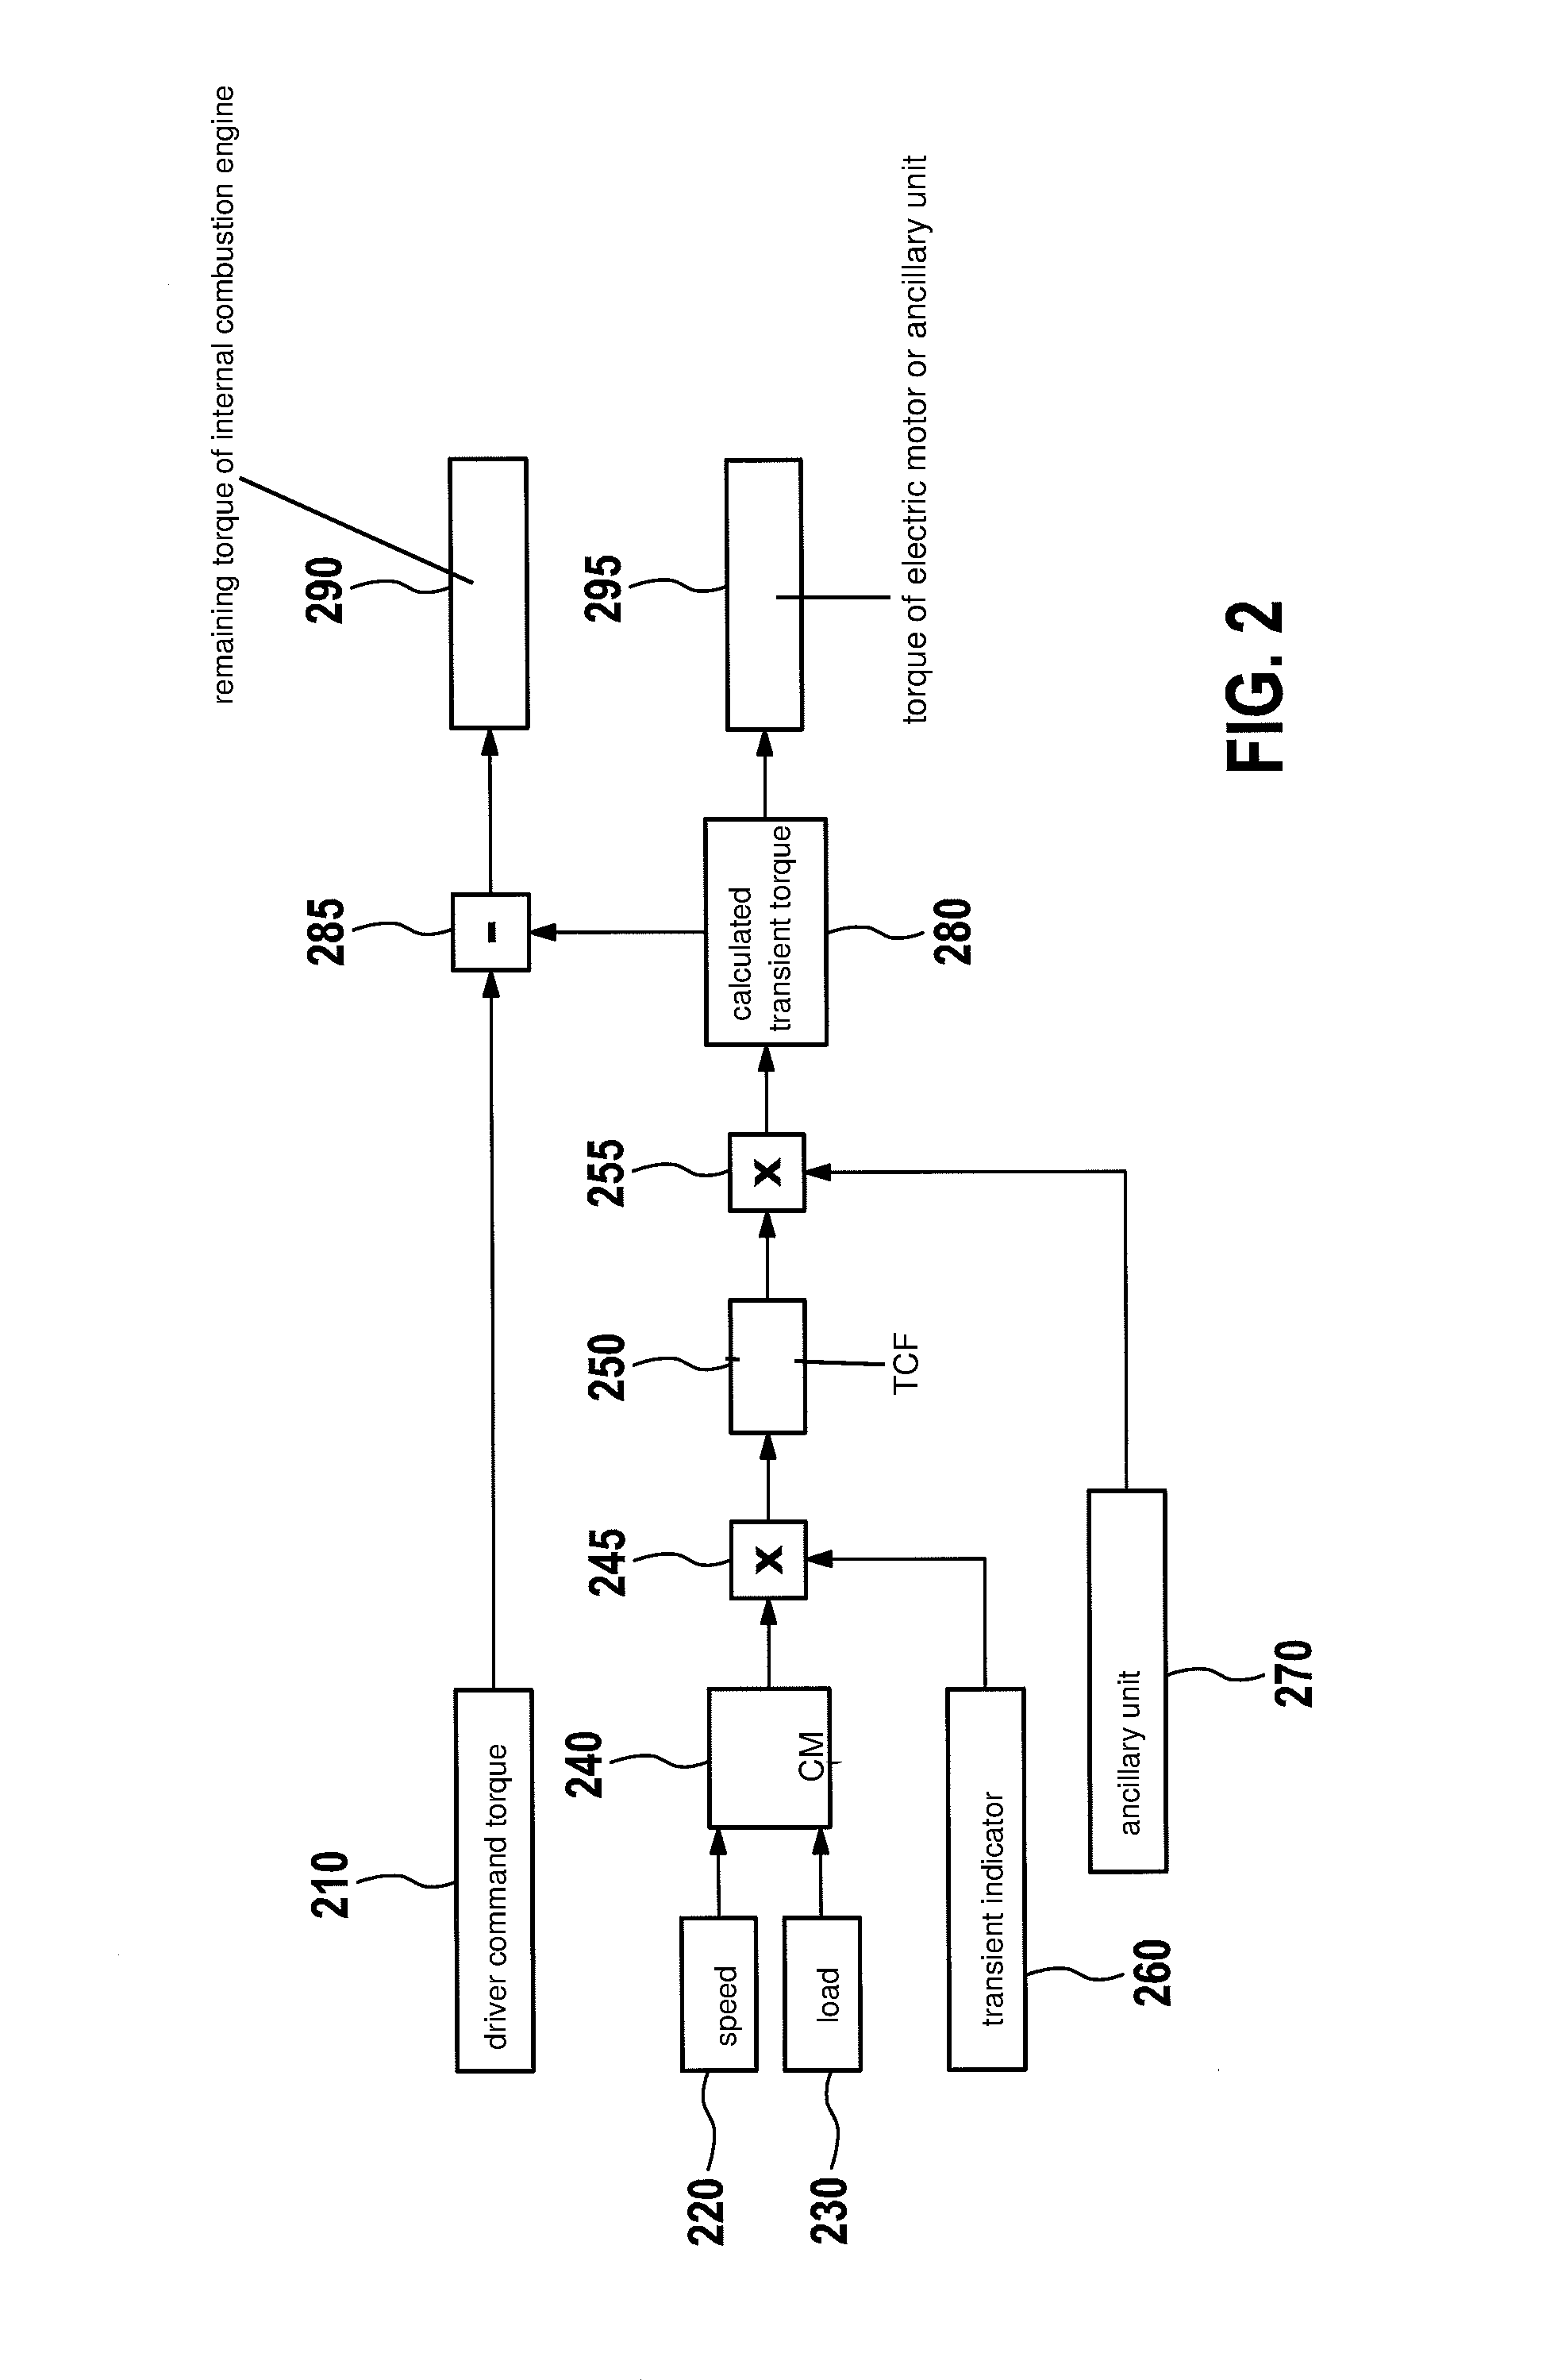 Method for reducing exhaust gas emissions during a transient transitional phase of a vehicle